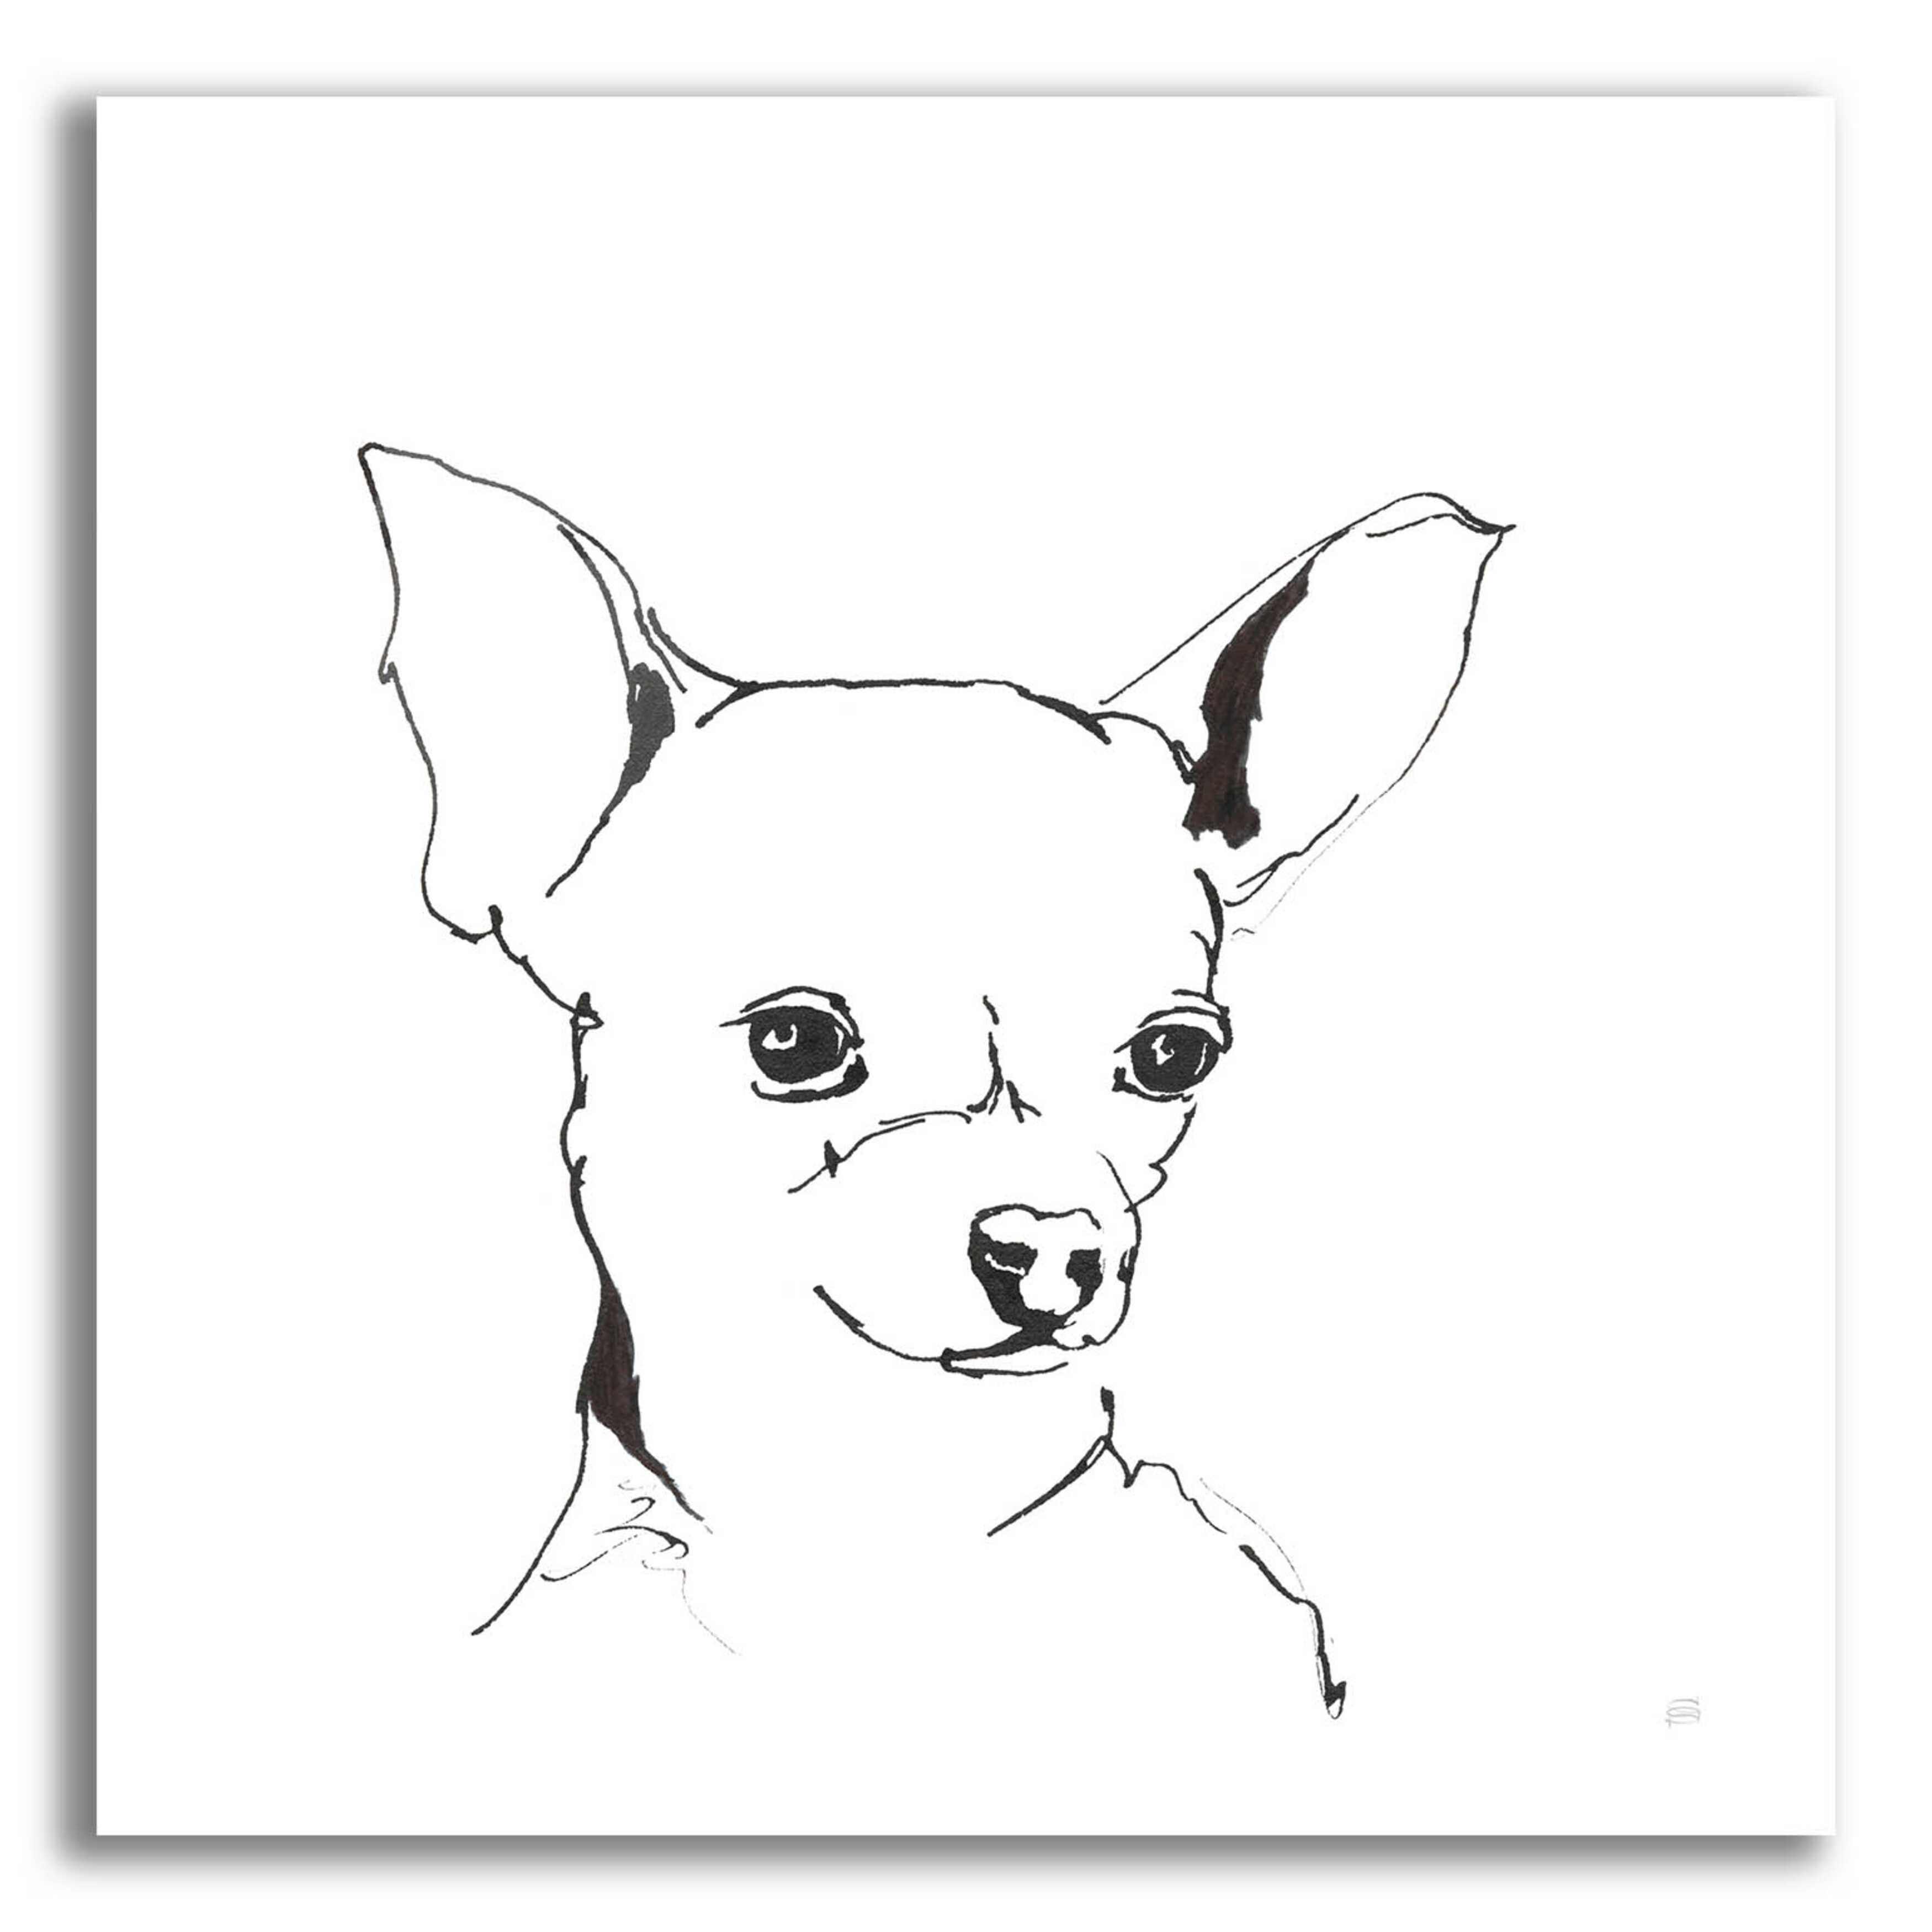 How to Draw Chihuahua Dog  Cute Chihuahua Drawing Easy Step by Step  Tutorial  YouTube